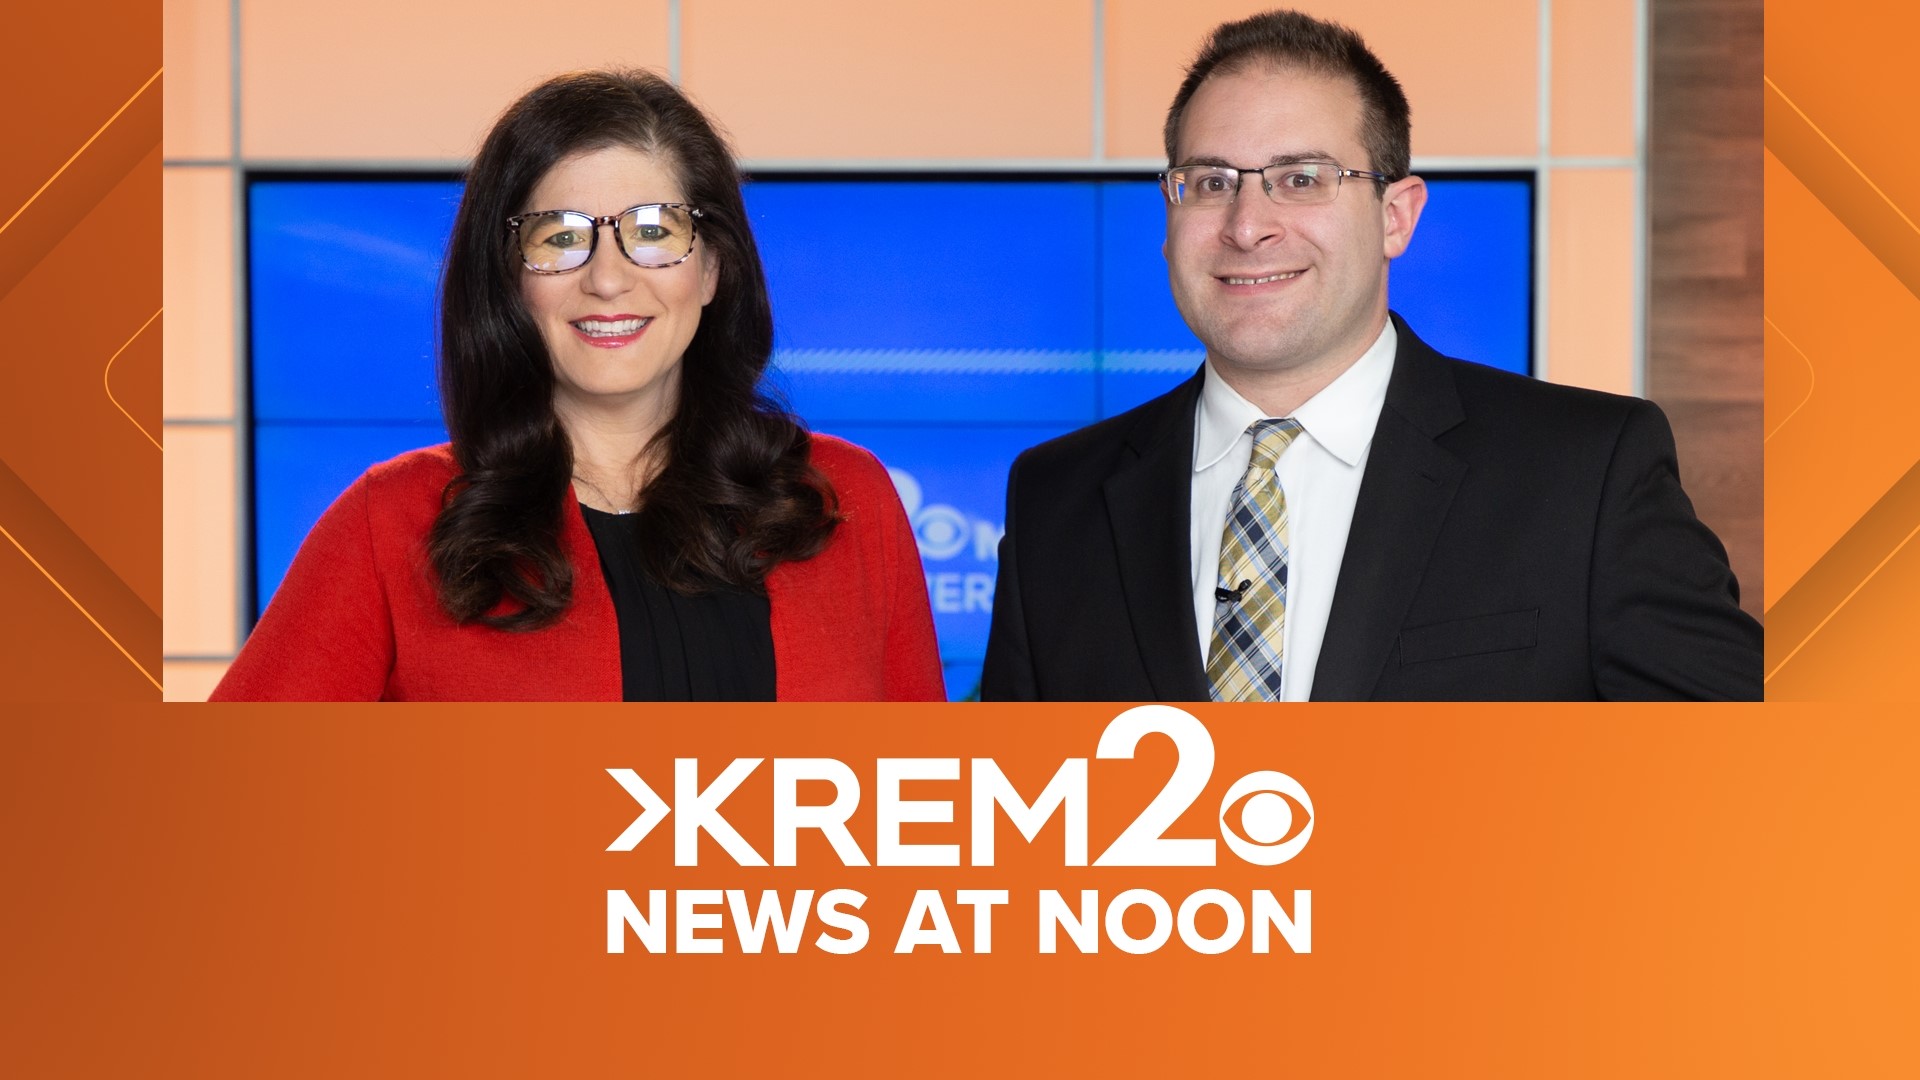 KREM 2 News updates the morning's headlines with a focus on breaking news and weather for the Inland Northwest.